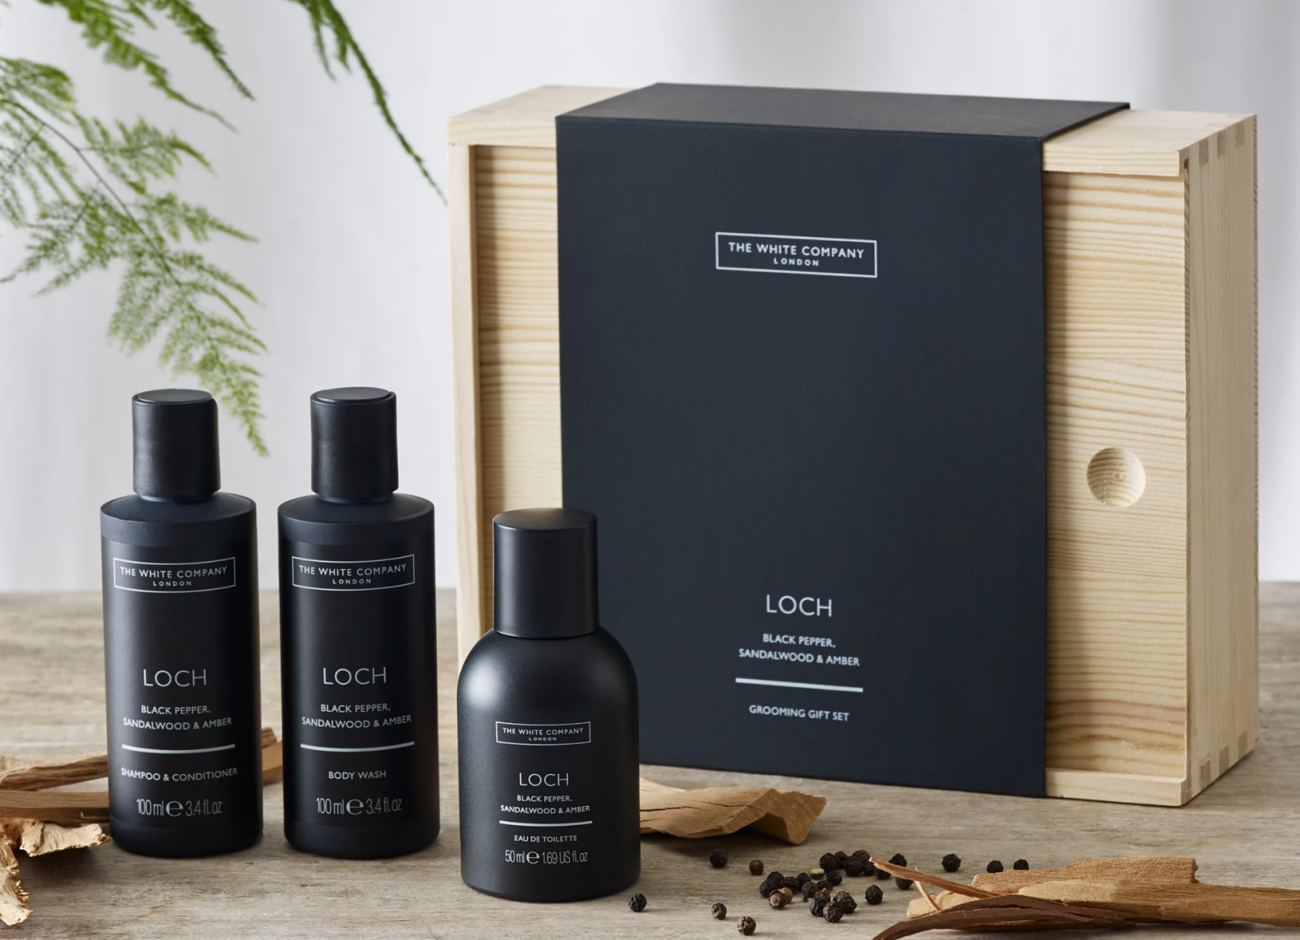 The White Company men's grooming set